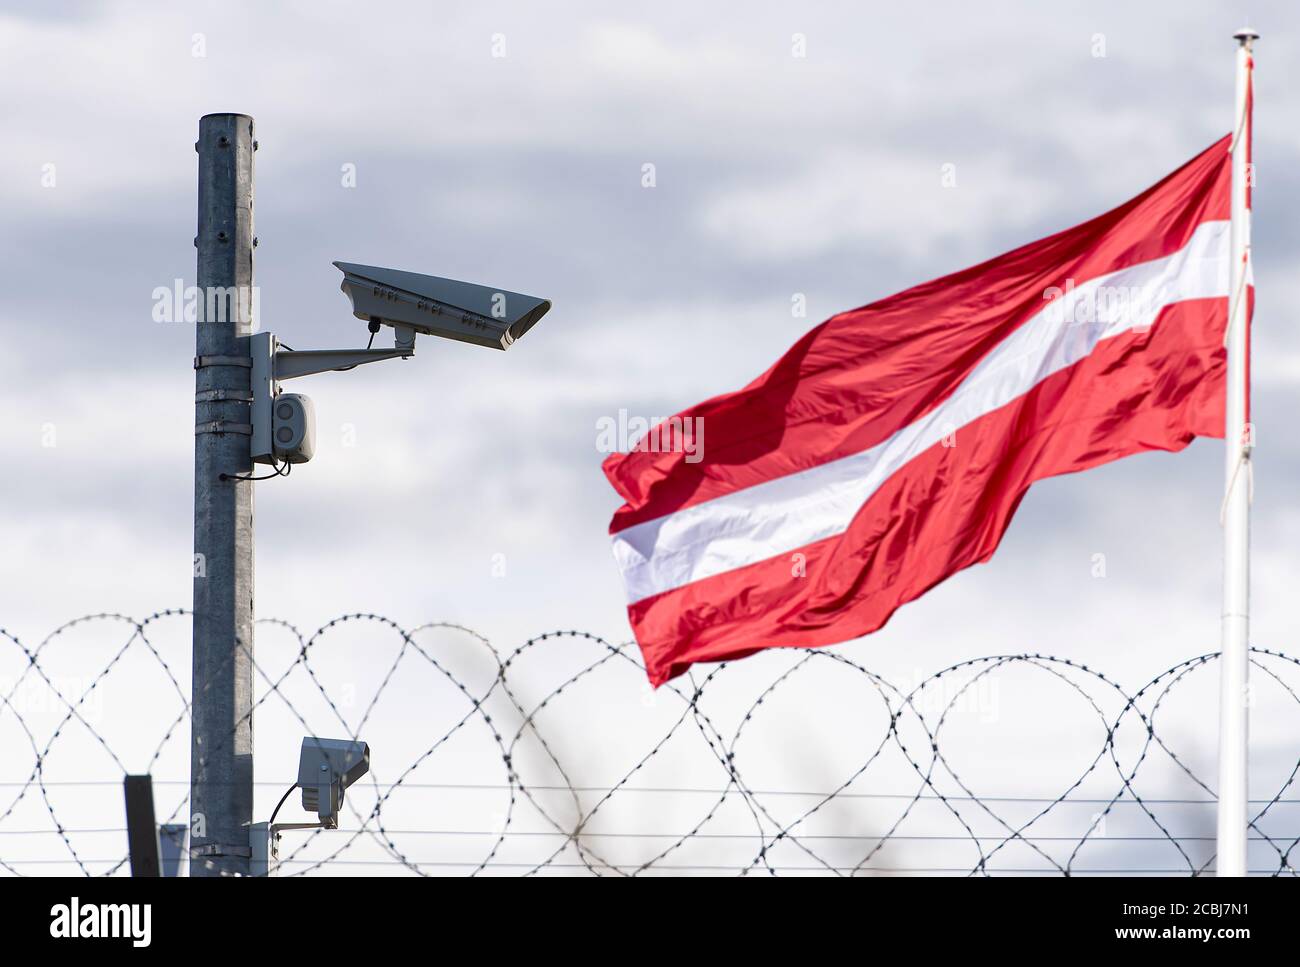 Latvian flag and border with surveillance camera and barbed wire, concept picture Stock Photo